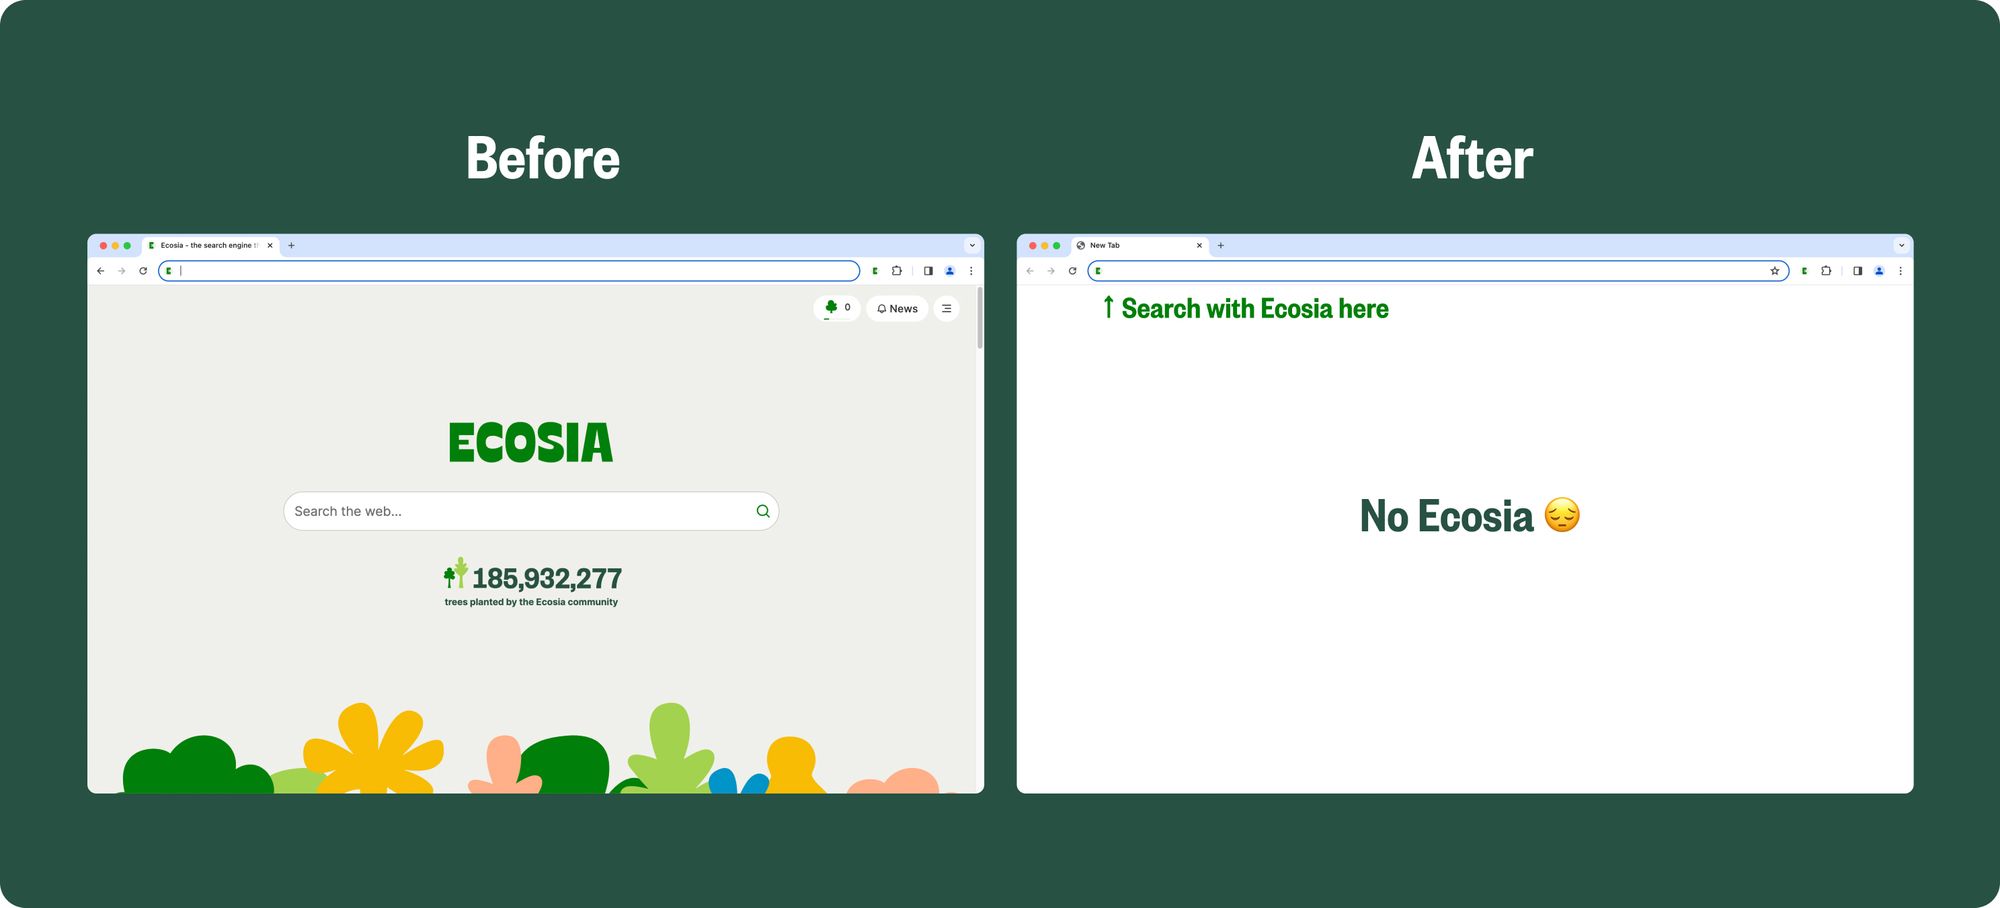 Why am I not seeing Ecosia on Chrome anymore?